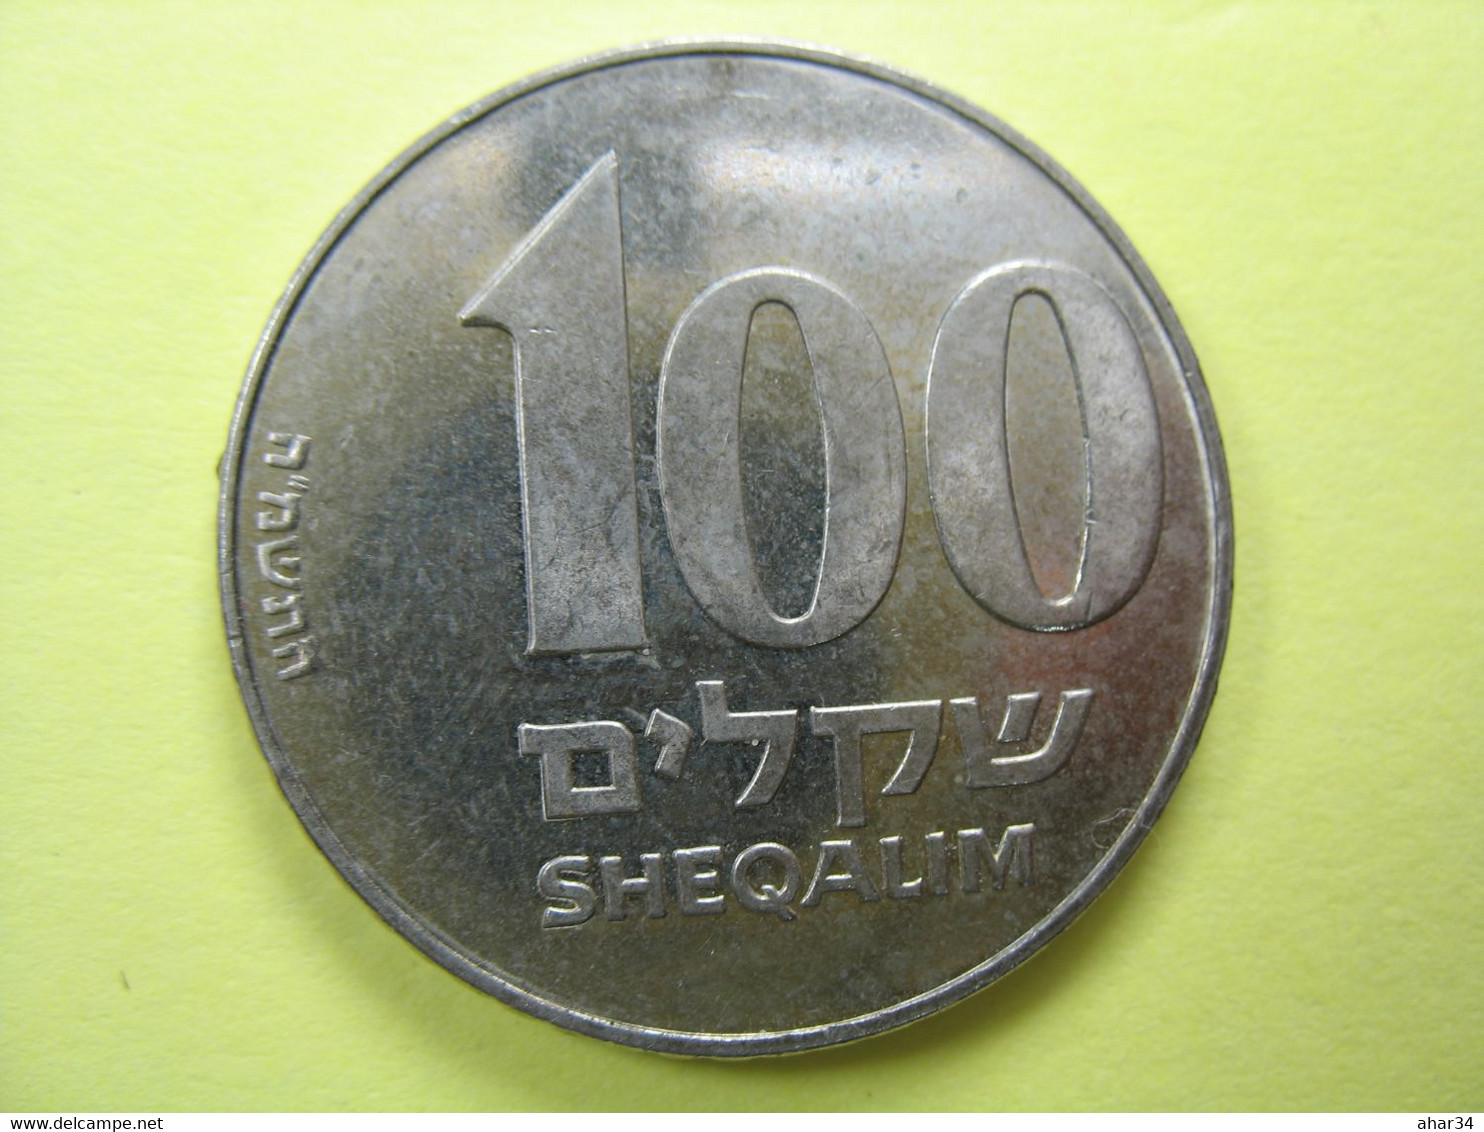 TEMPLATE LISTING ISRAEL  LOT OF  10 COINS 100 SHEQALIM 1985 JABOTINSKY  UNC COIN. - Andere - Azië